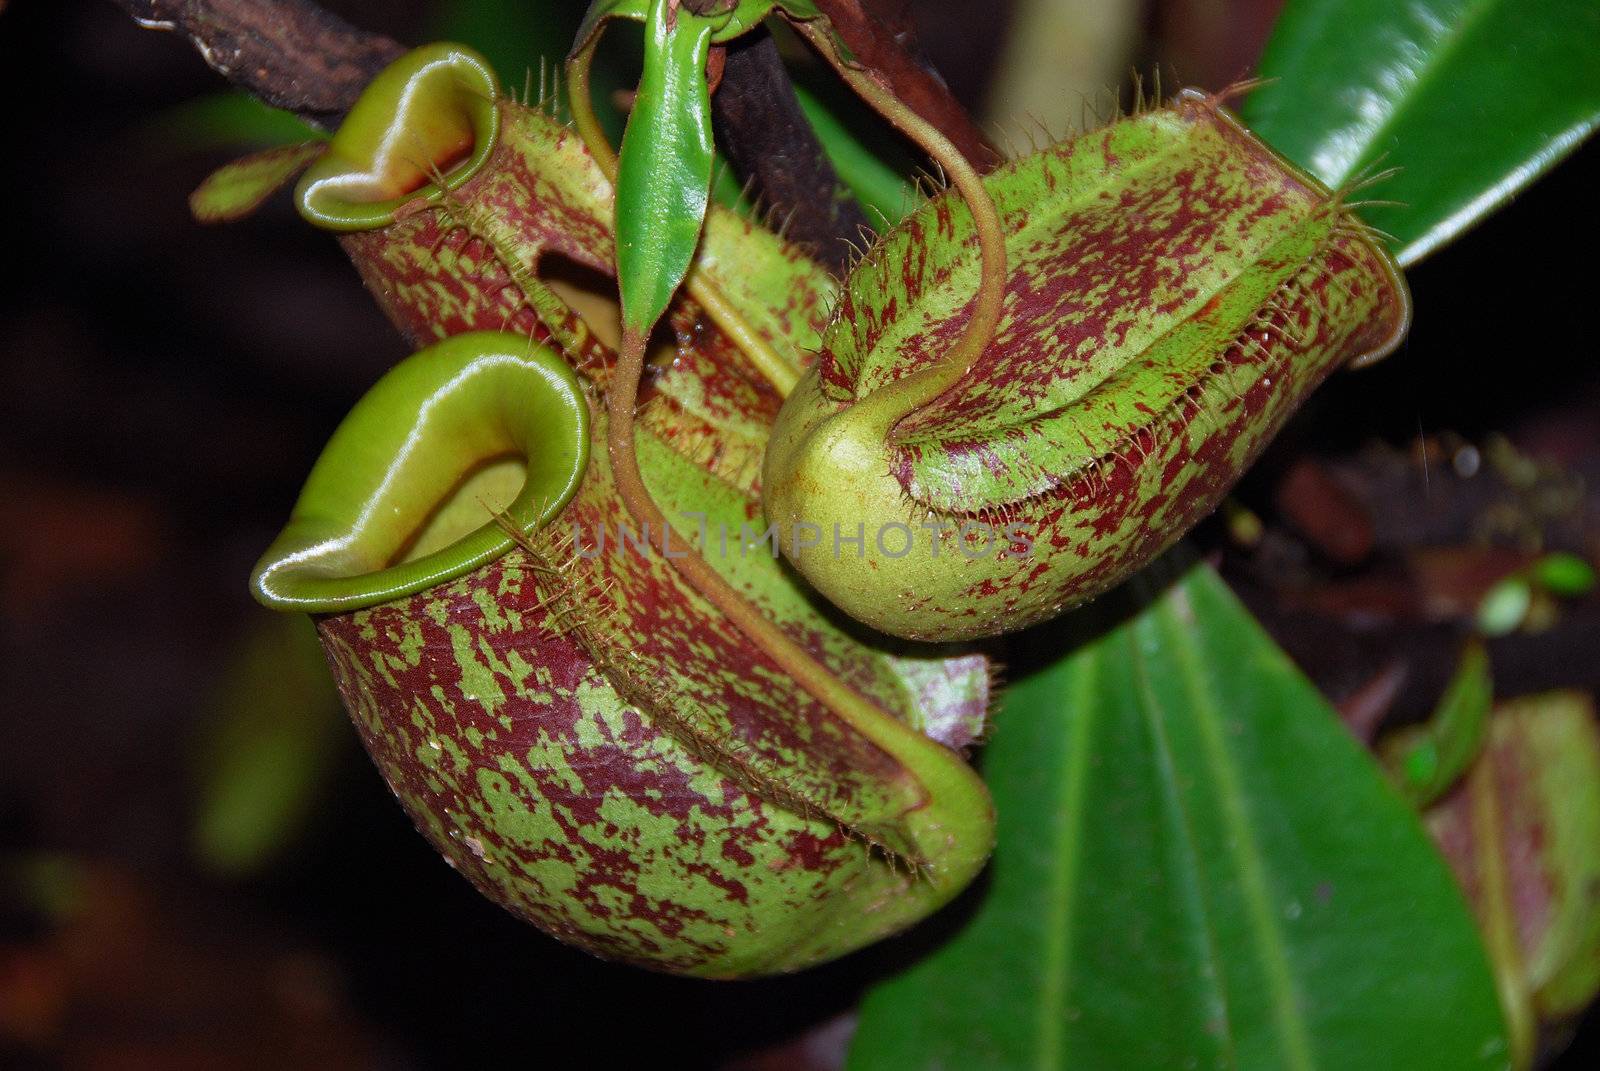 Close-up of a pitcher plant